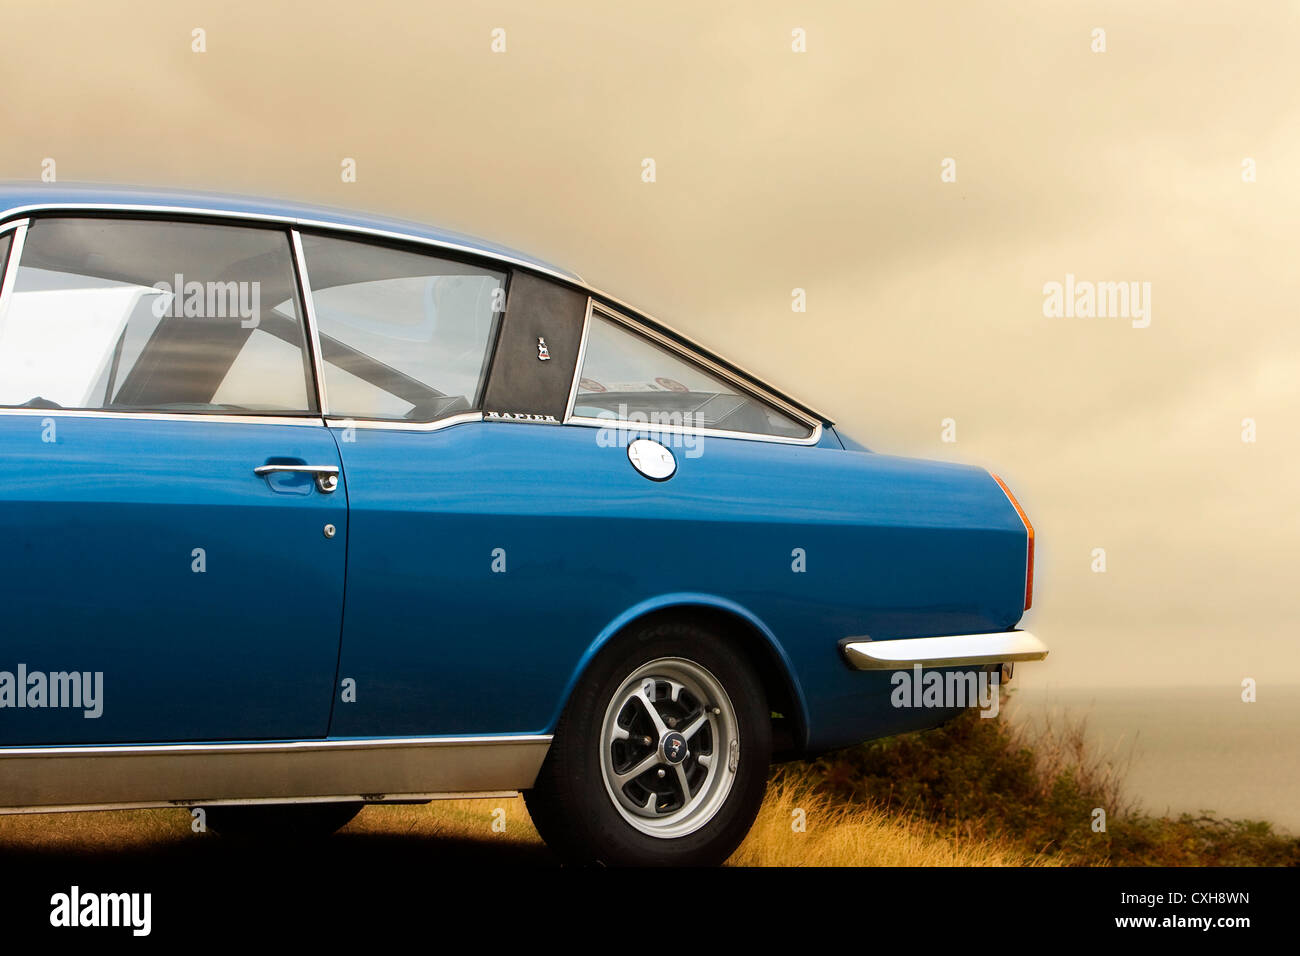 Sunbeam Rapier 1967-1976, blue car with chrome bumper and detailing parked on grass with sea and cloudy sky in background. Stock Photo